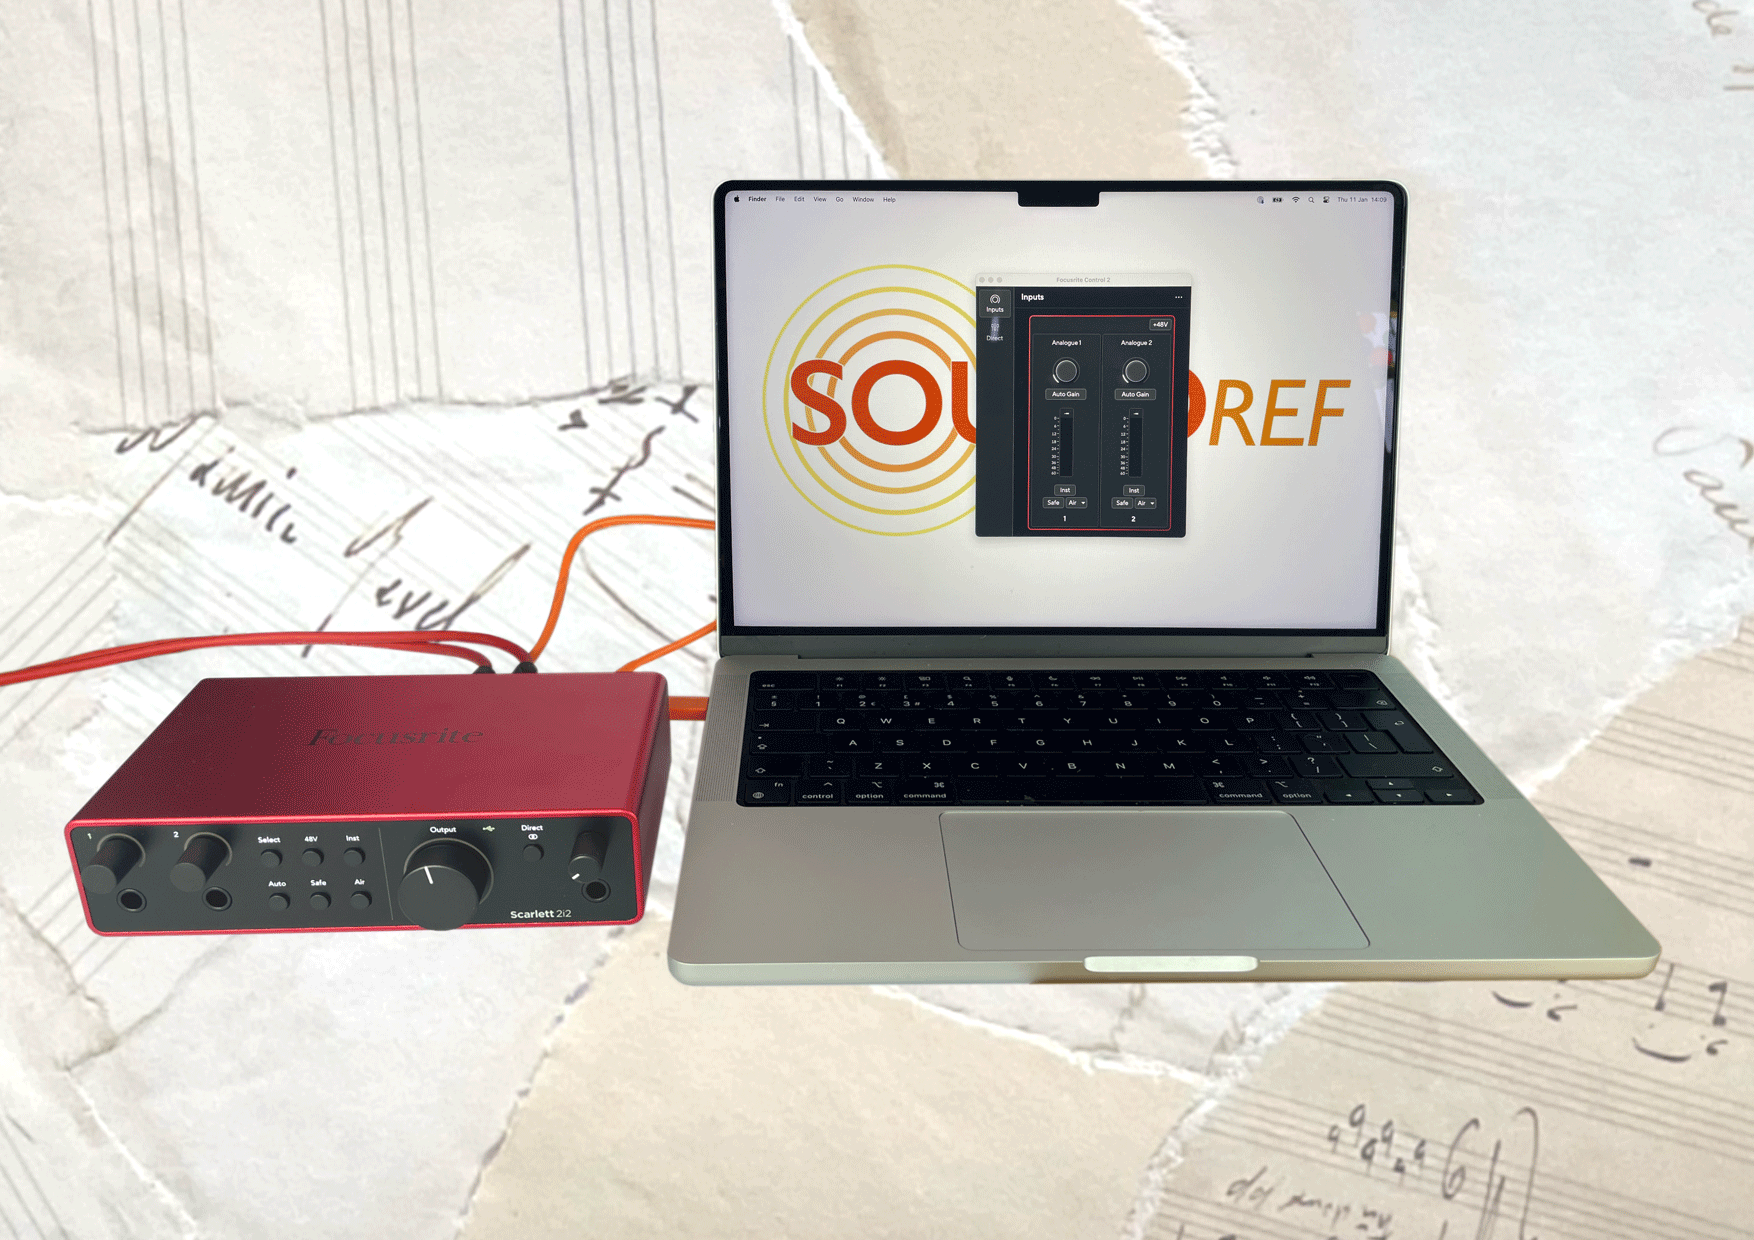 Focusrite 2i2 4th gen, connected to a Macbook Pro M3